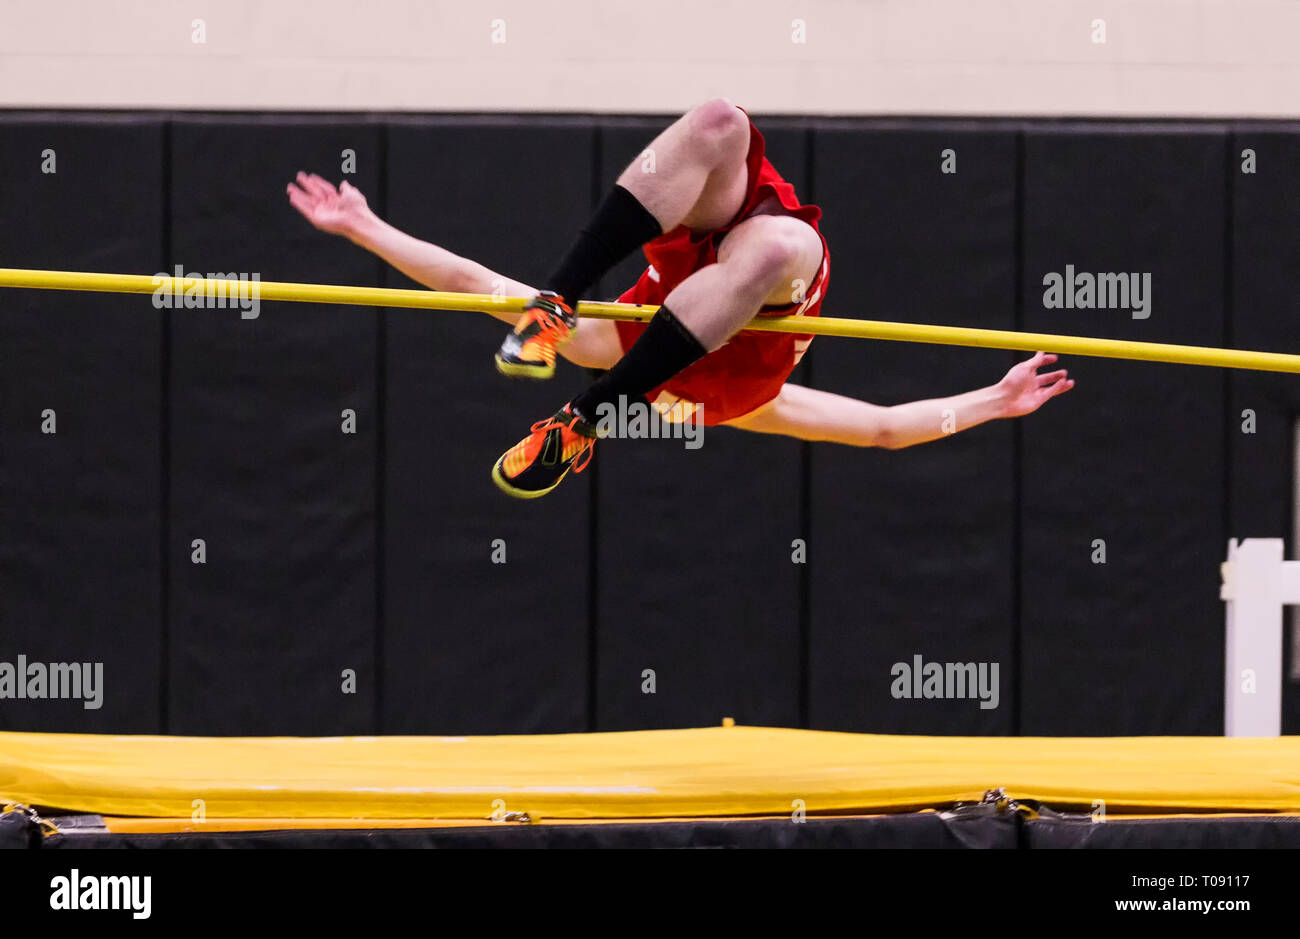 A high school high jumper competing in a track and field event attempting to clear the bar. Stock Photo